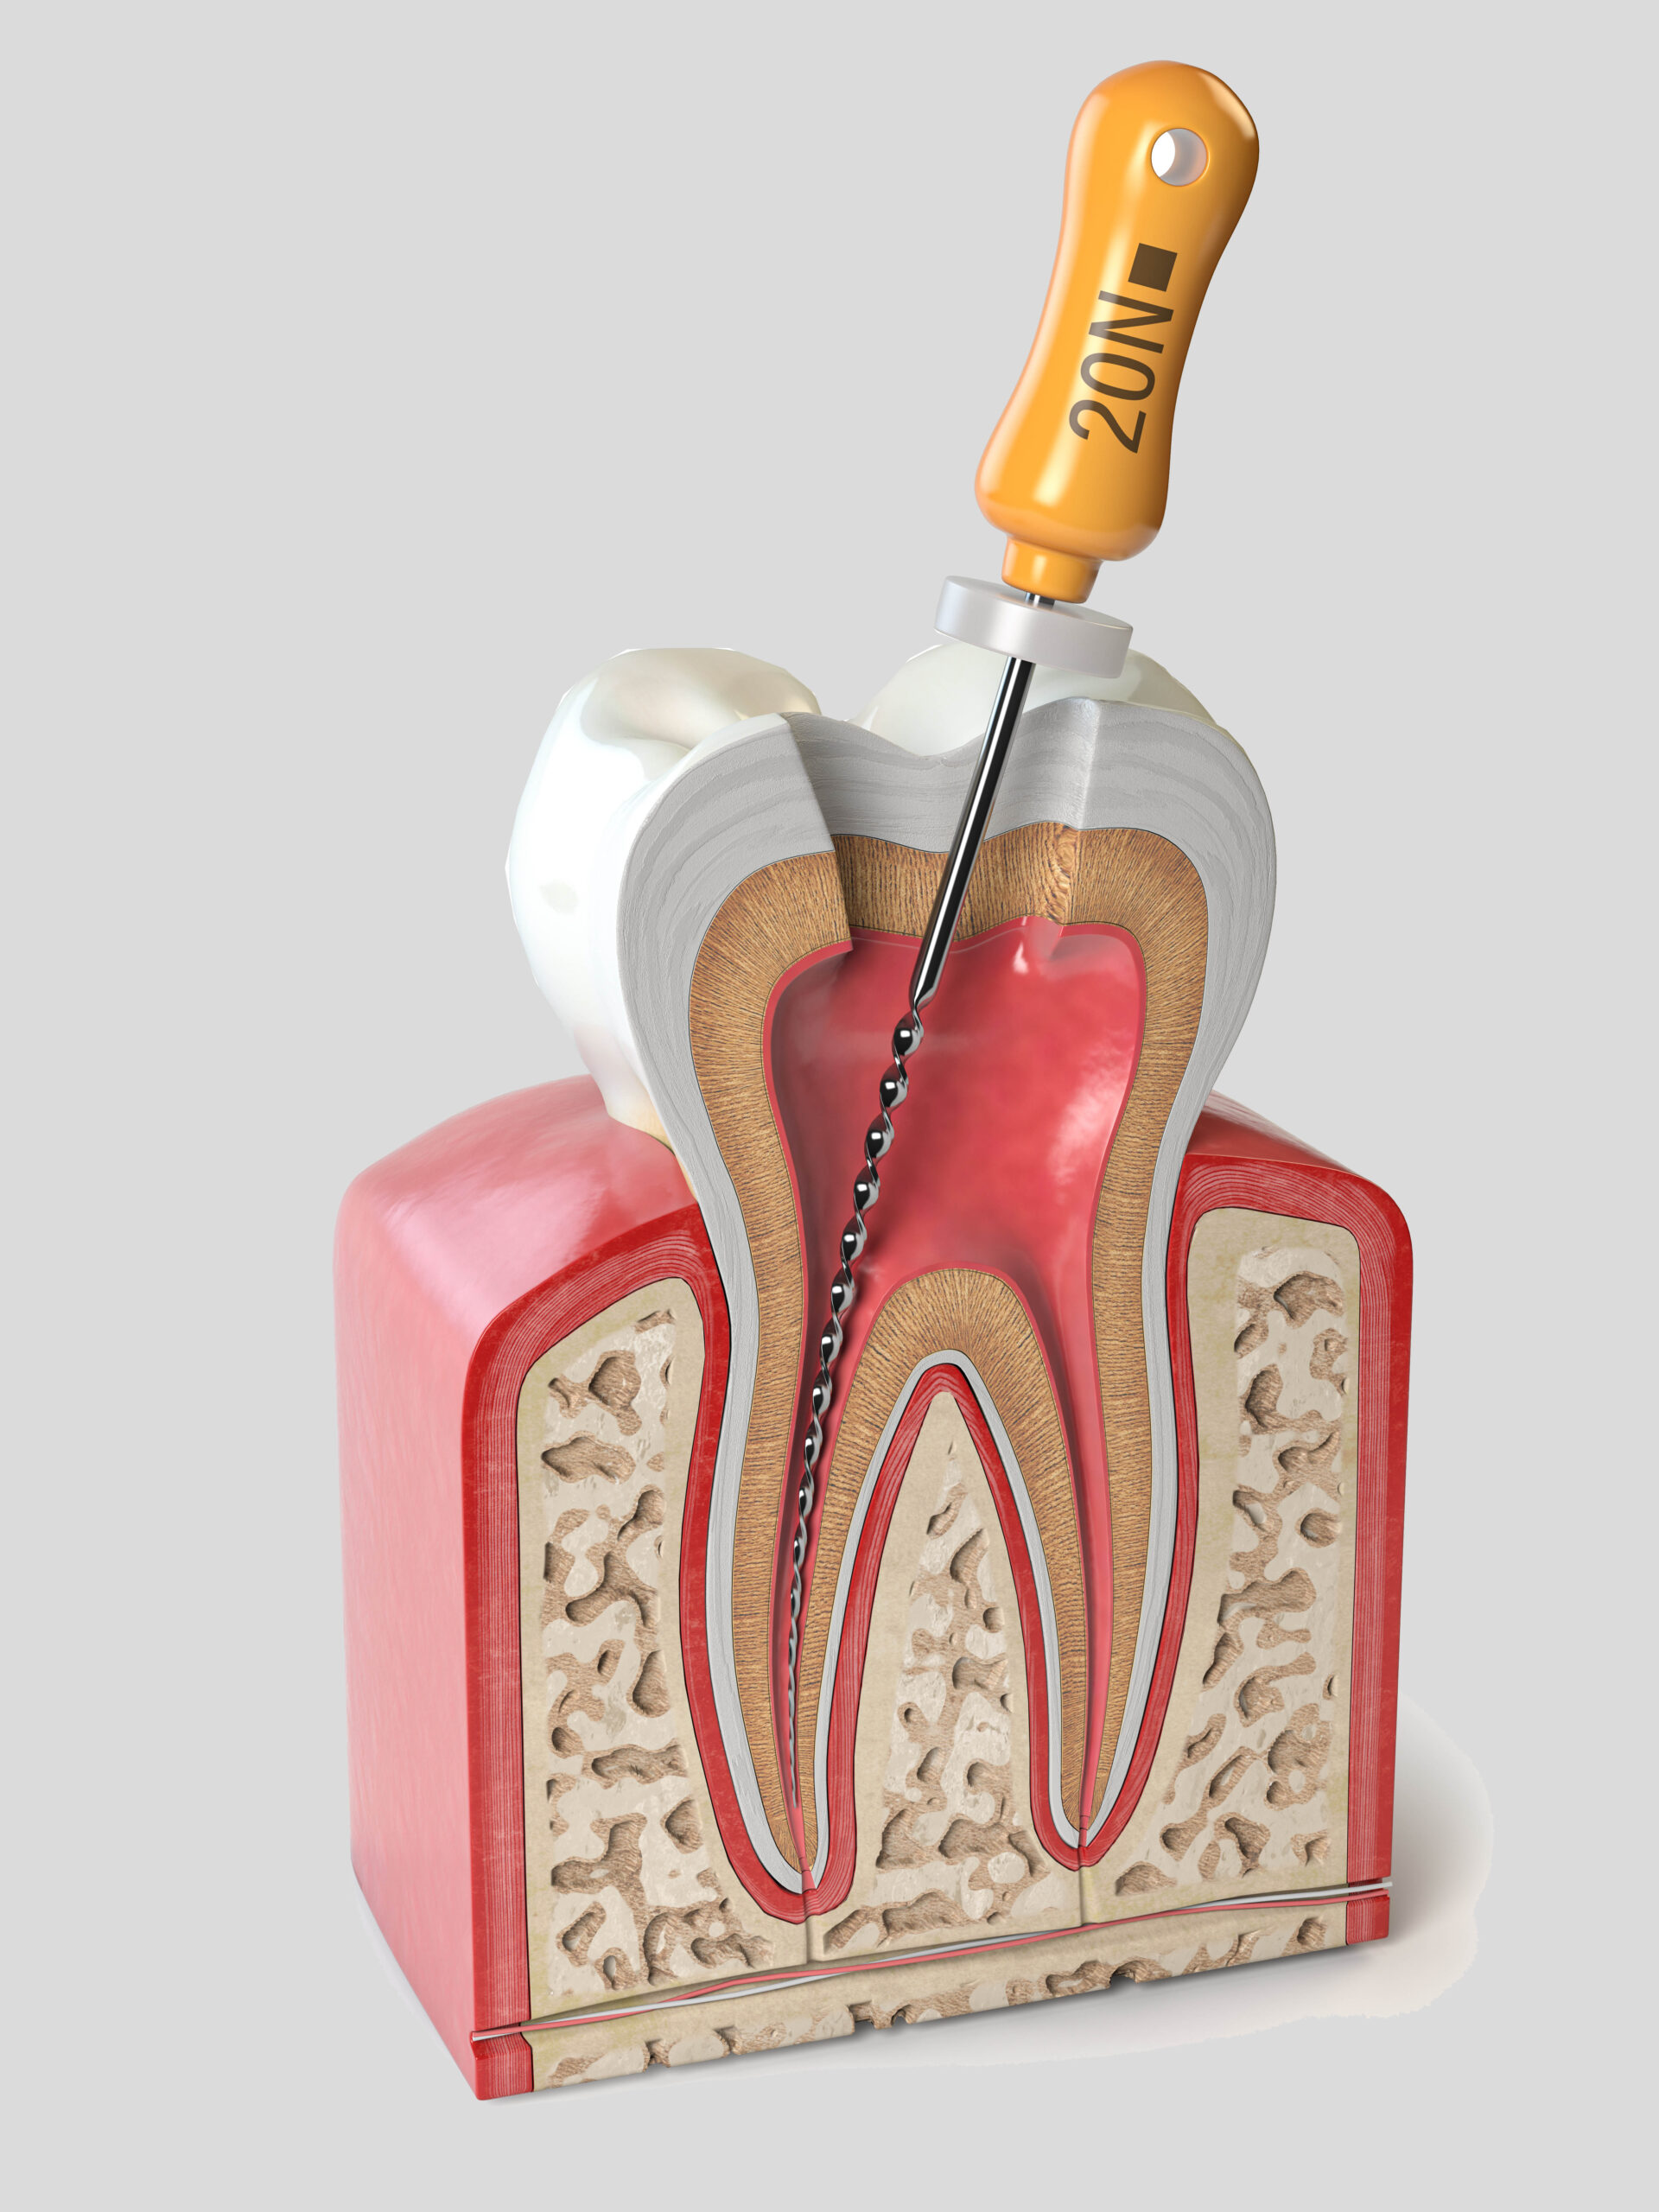 Cross section of Human tooth with endodontic file isolated on white. 3d illustration